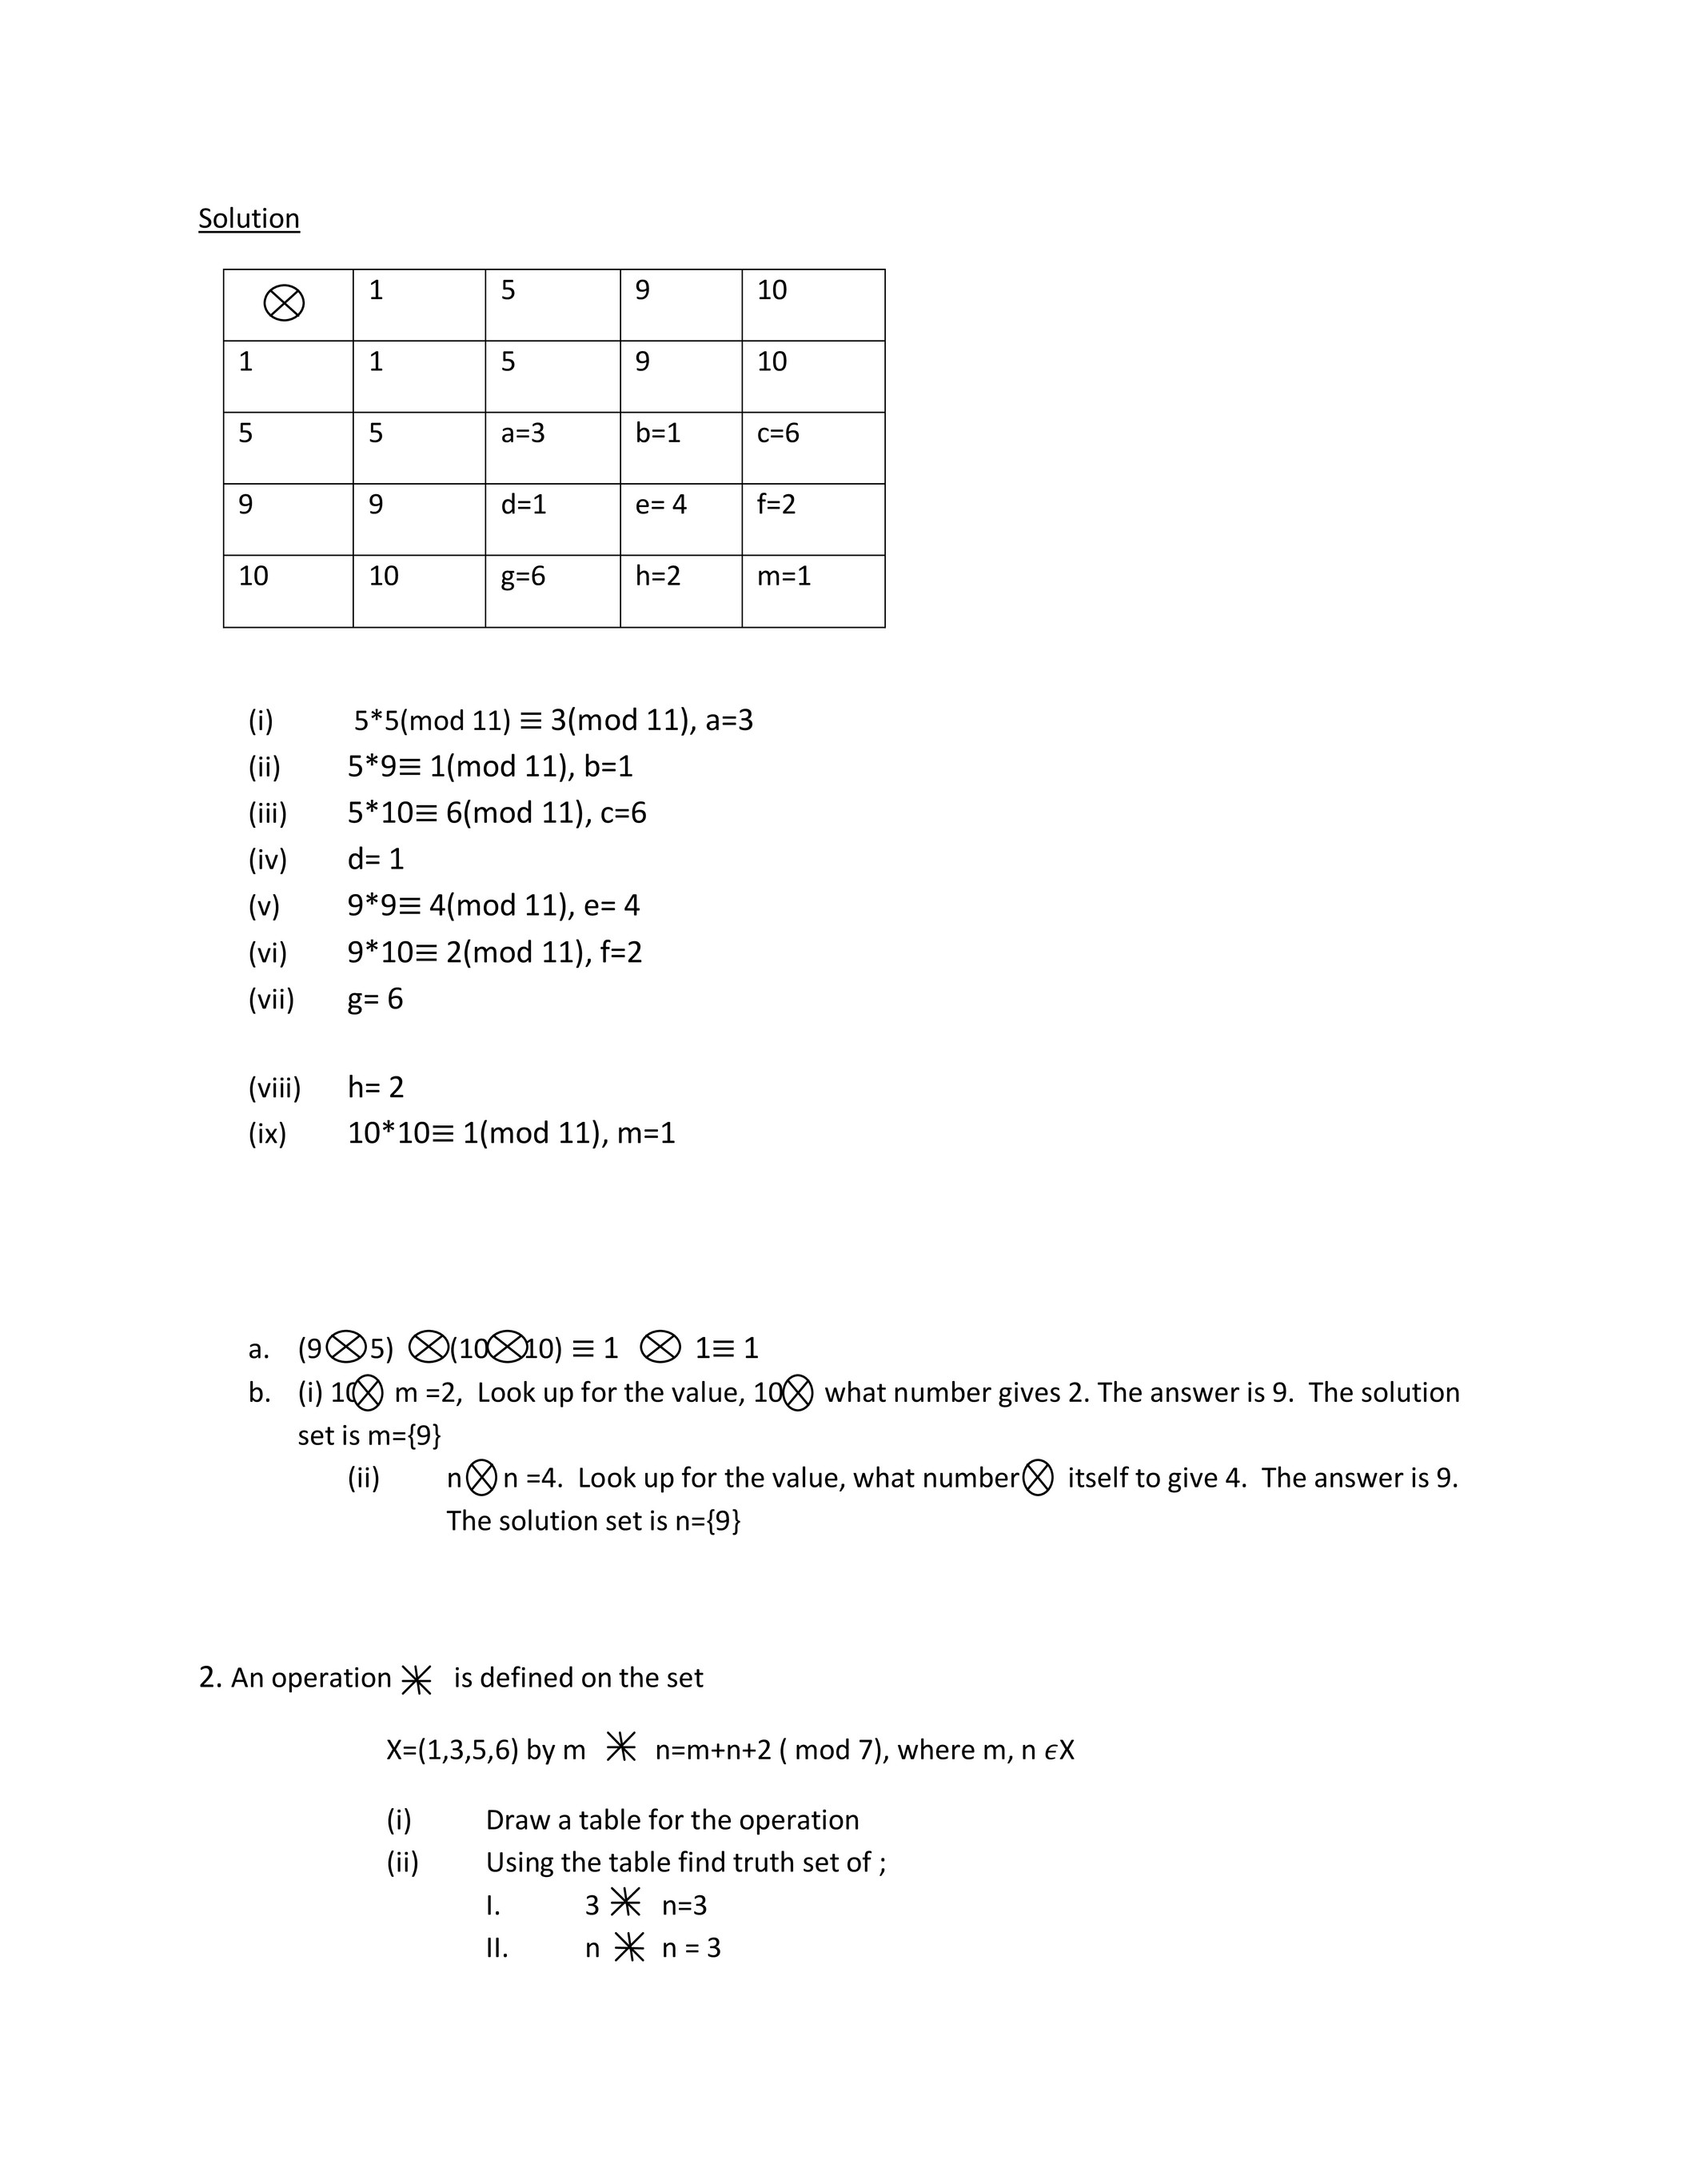 My Publications Modular Arithmetic Concepts And Applications Page 1 Created With Publitas Com